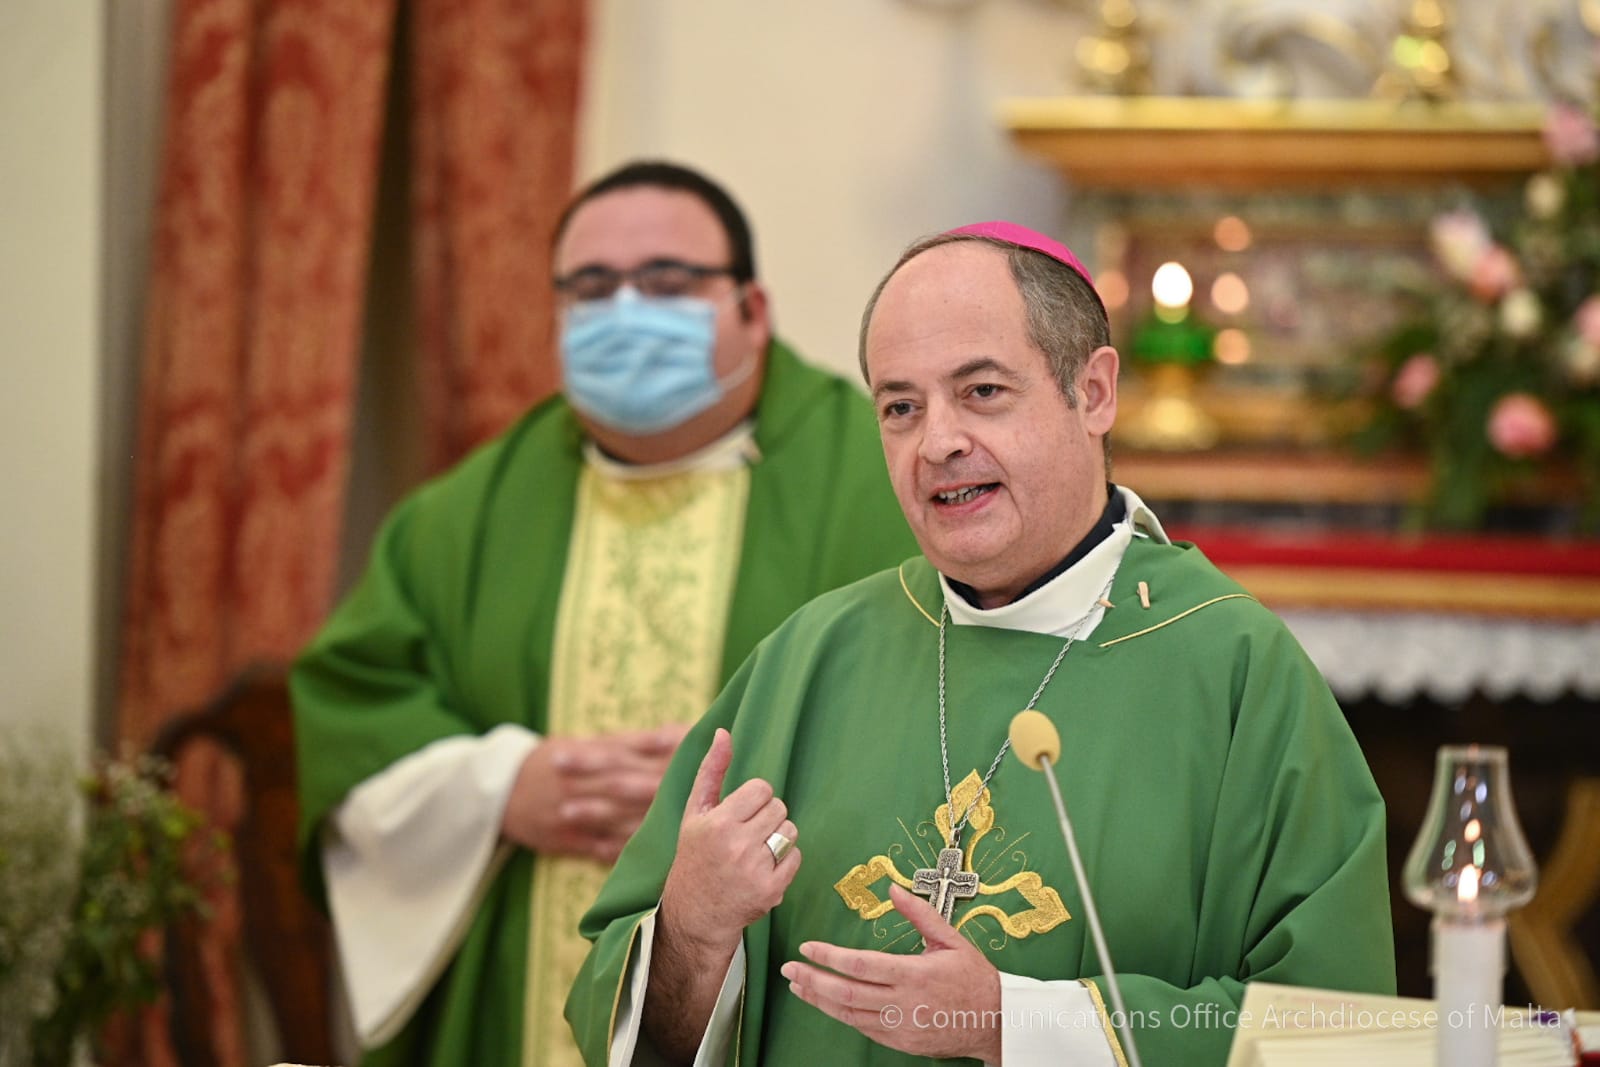 Priorities In The Right Place Bishop Galea Curmi Archdiocese Of Malta